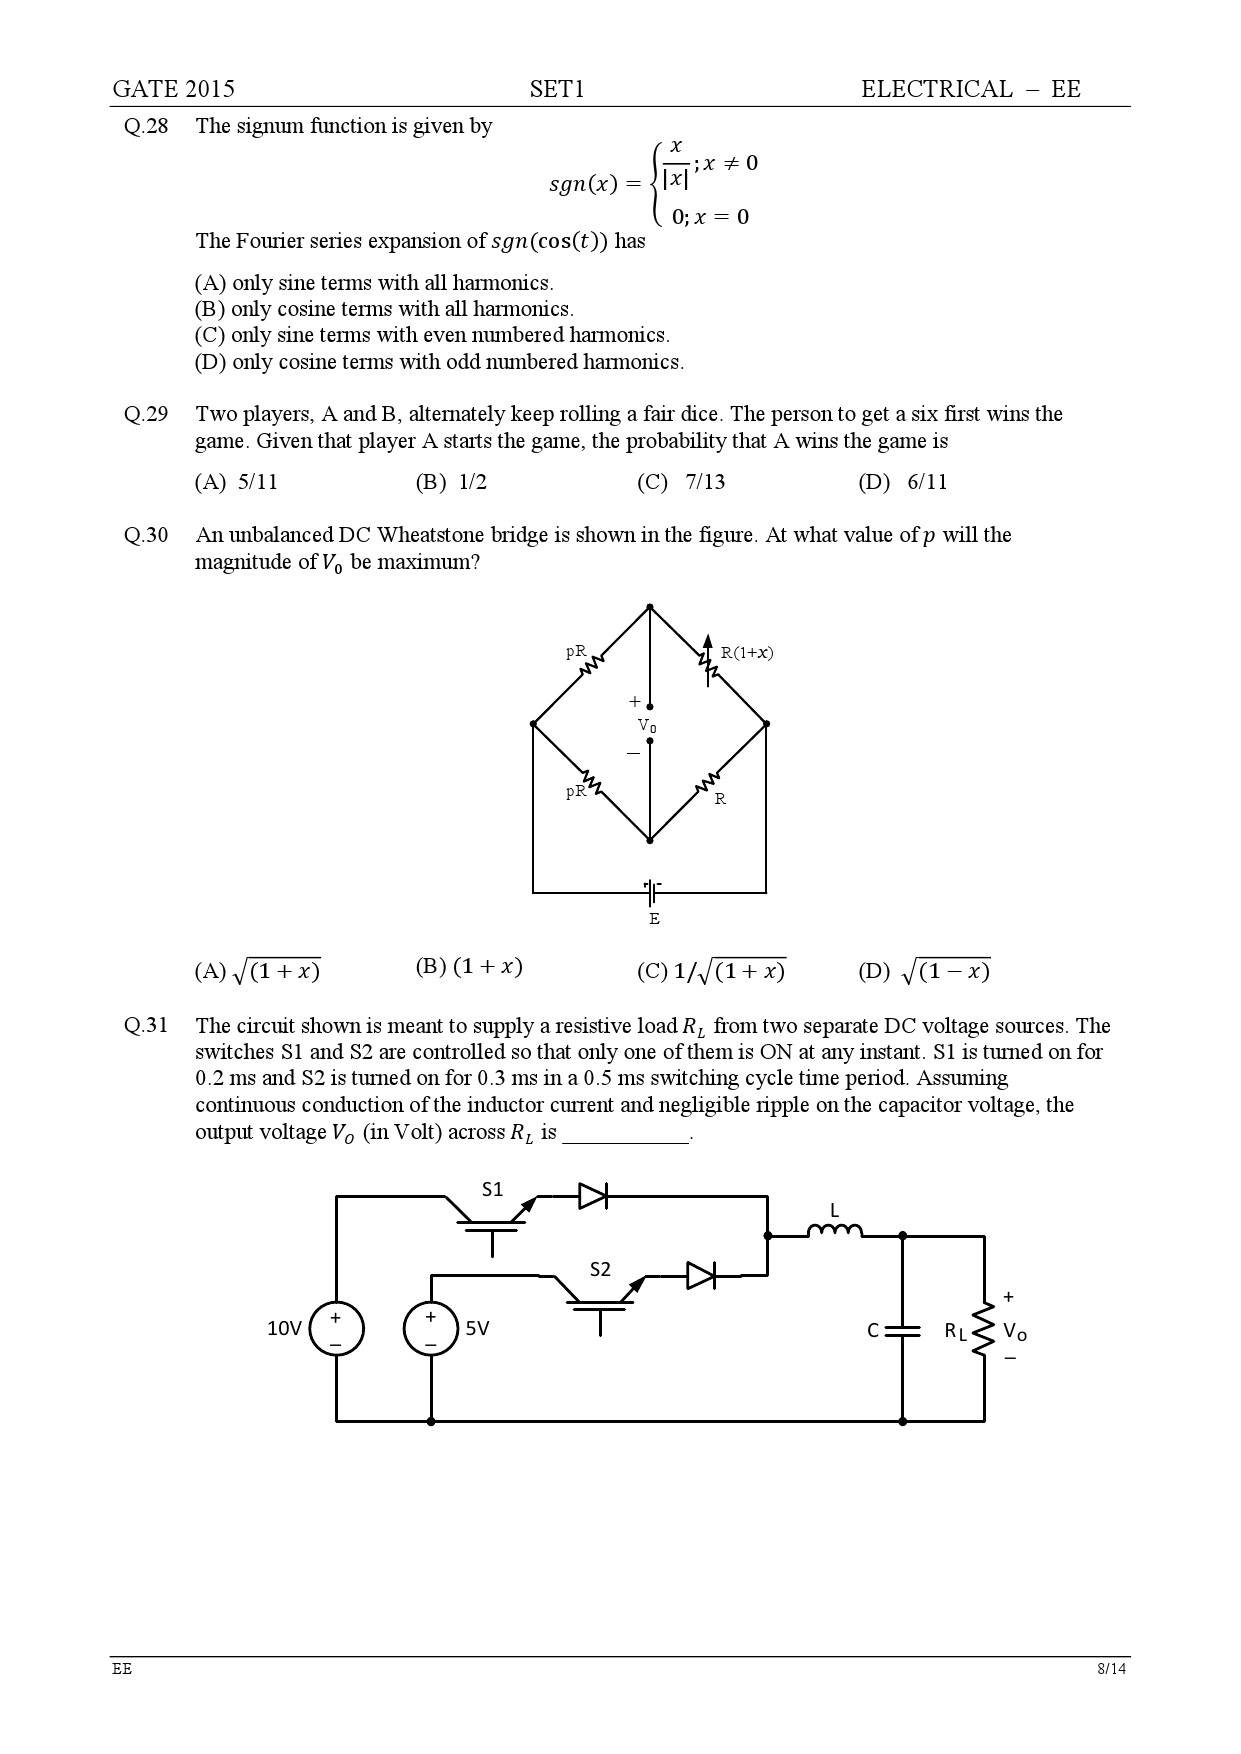 GATE Exam Question Paper 2015 Electrical Engineering Set 1 8